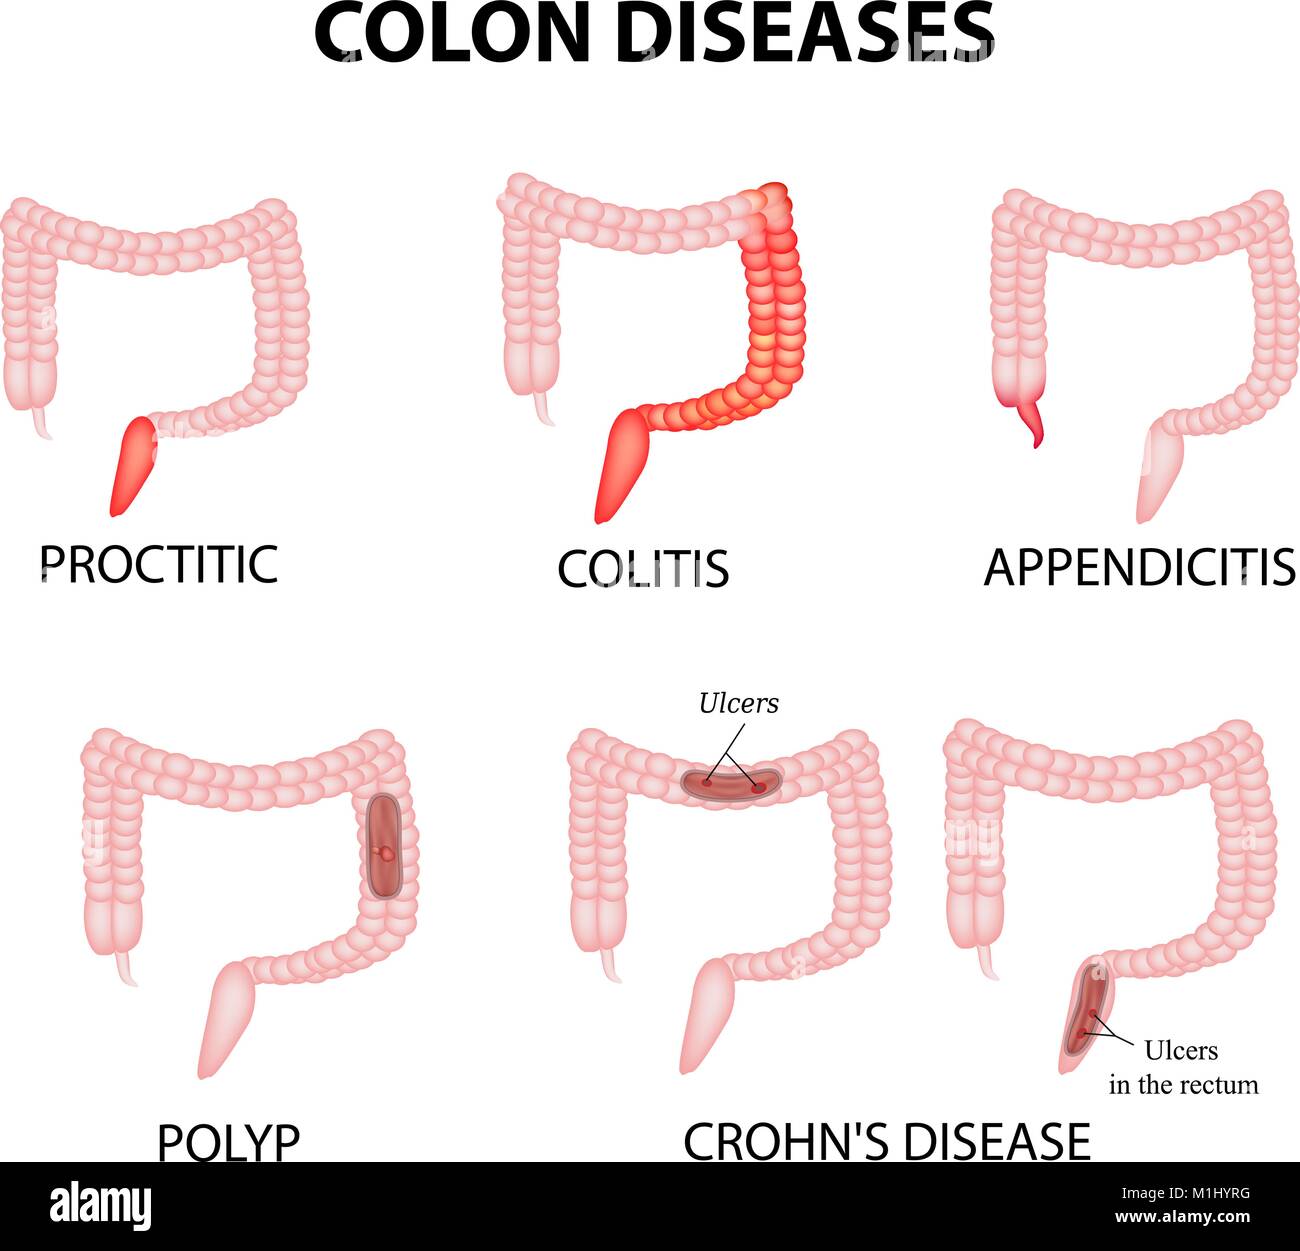 Colon diseases. Proctitis, colitis, appendicitis, polyp, ulcer, Crohn's disease Infographics Vector illustration on isolated background Stock Vector